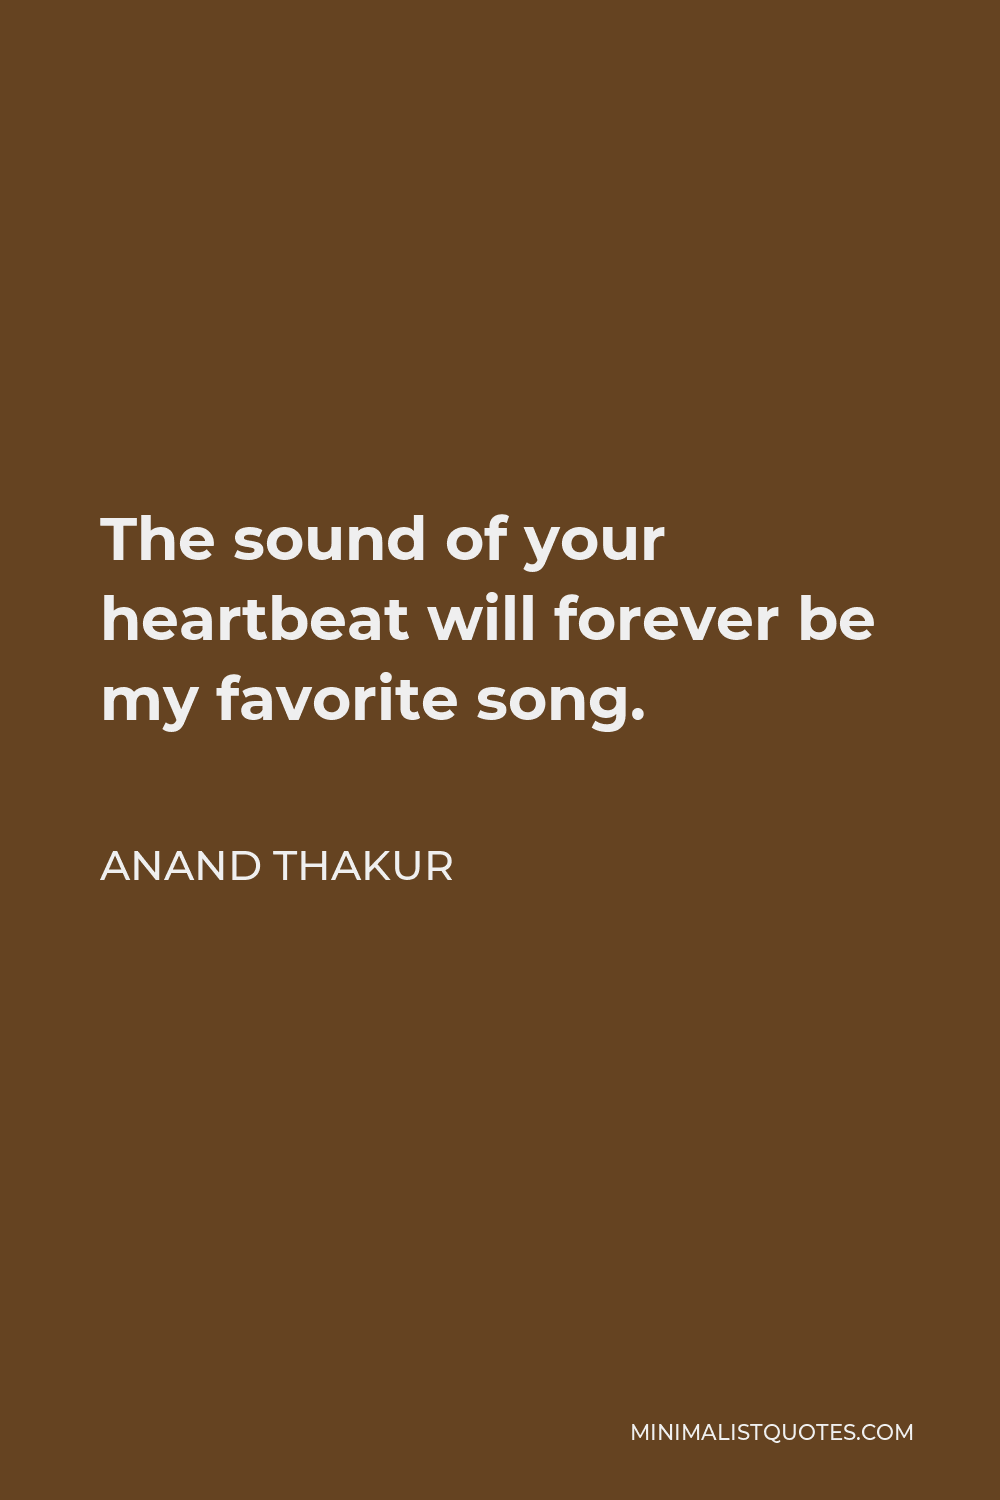 Anand Thakur Quote - The sound of your heartbeat will forever be my favorite song.